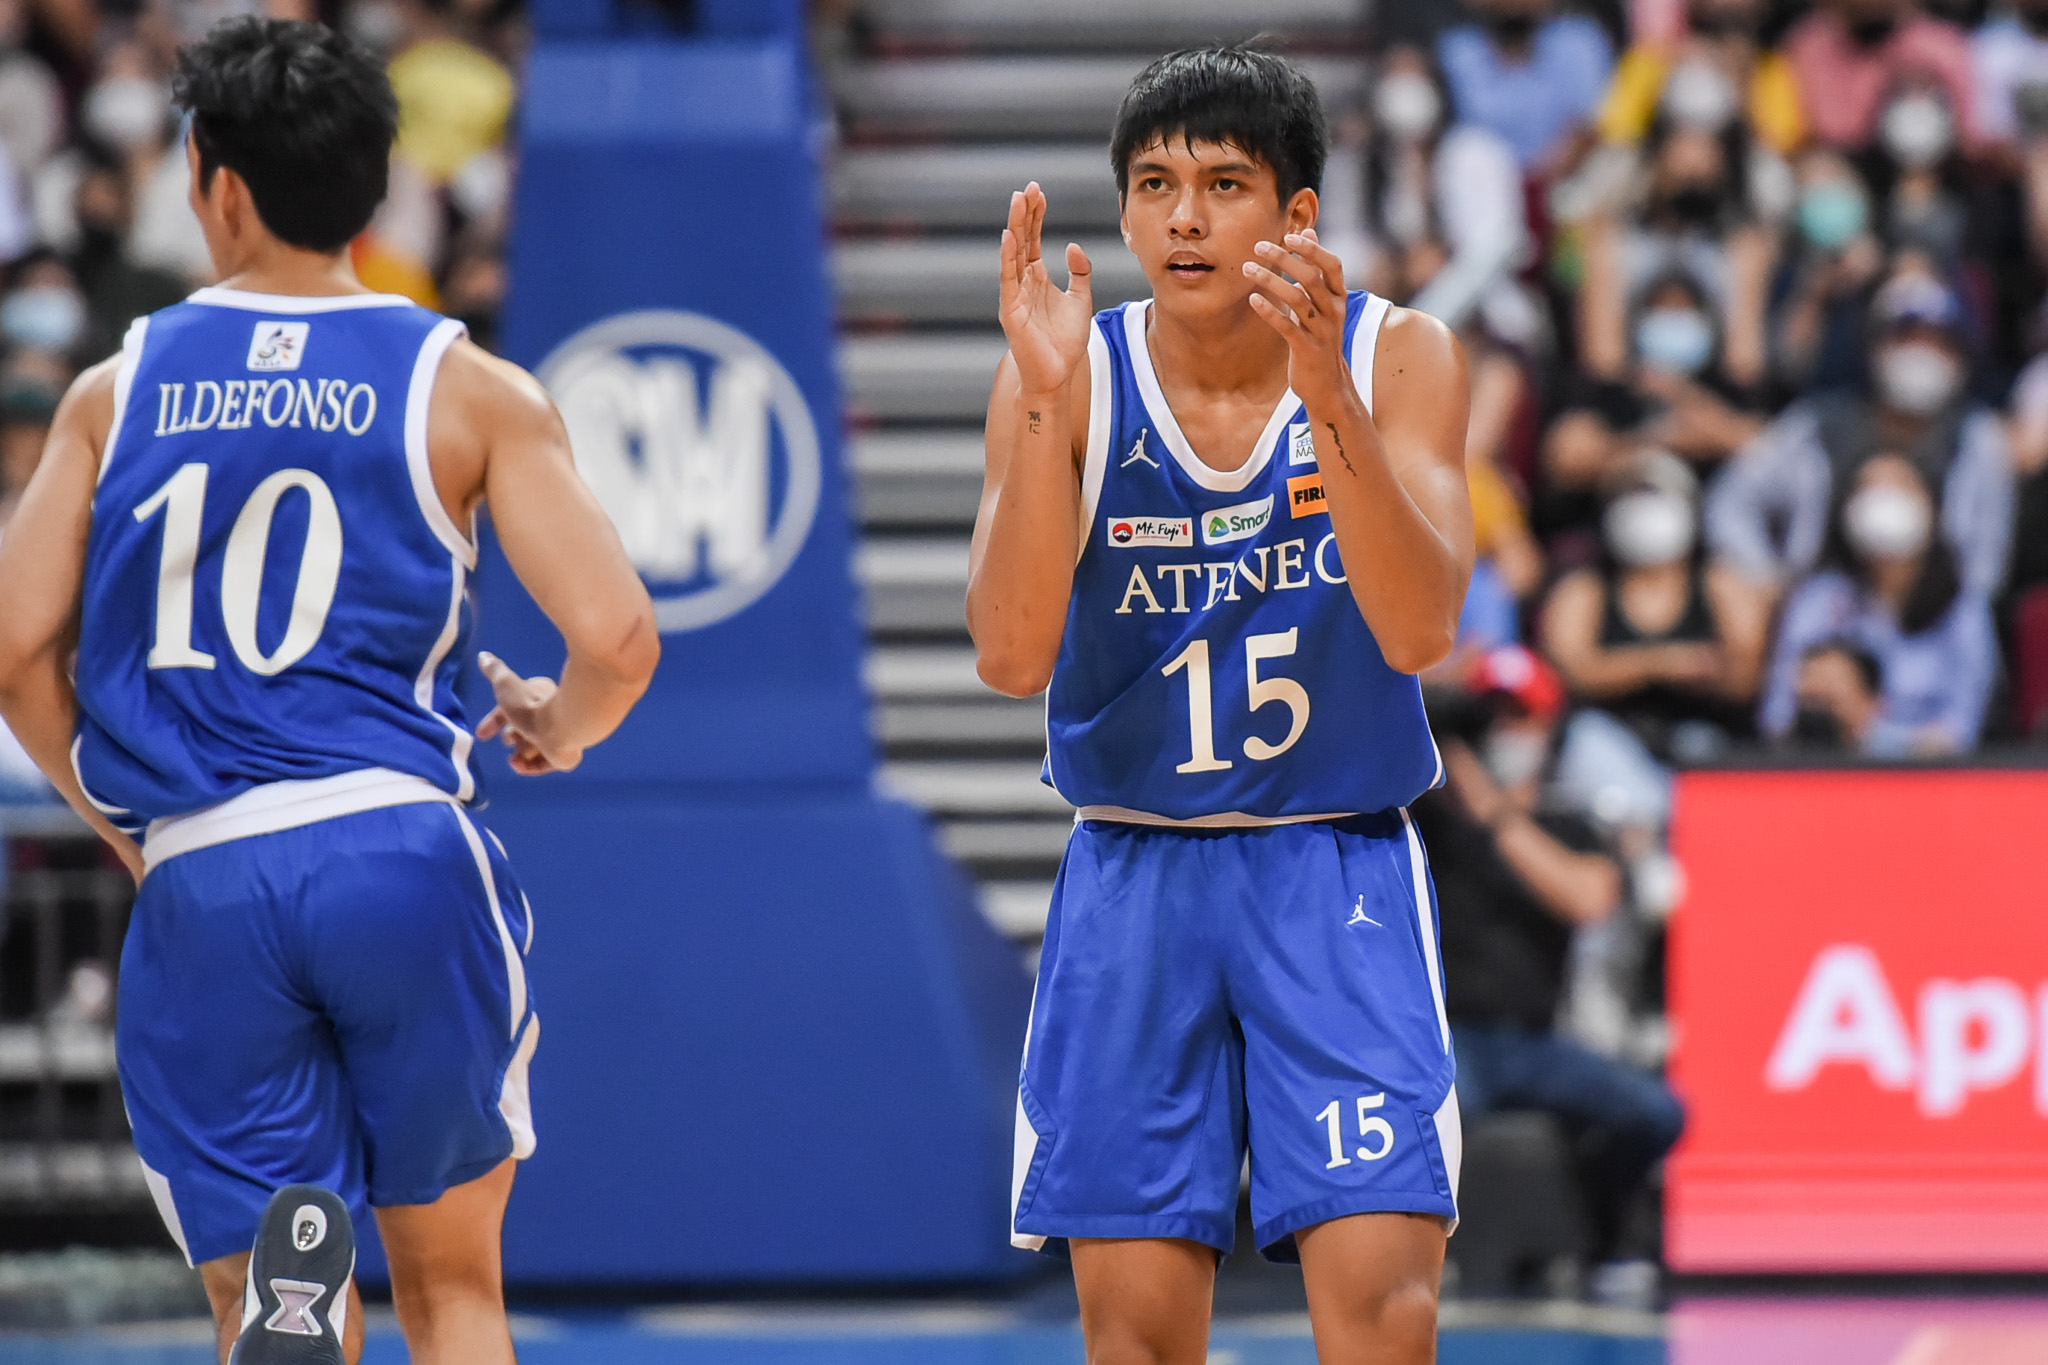 UAAP-85-MBB-ADMU-vs.-FEU-Forthsky-Padrigao-8399 Padrigao spreads his wings and flies in first game as Ateneo's PG1 ADMU Basketball News UAAP  - philippine sports news